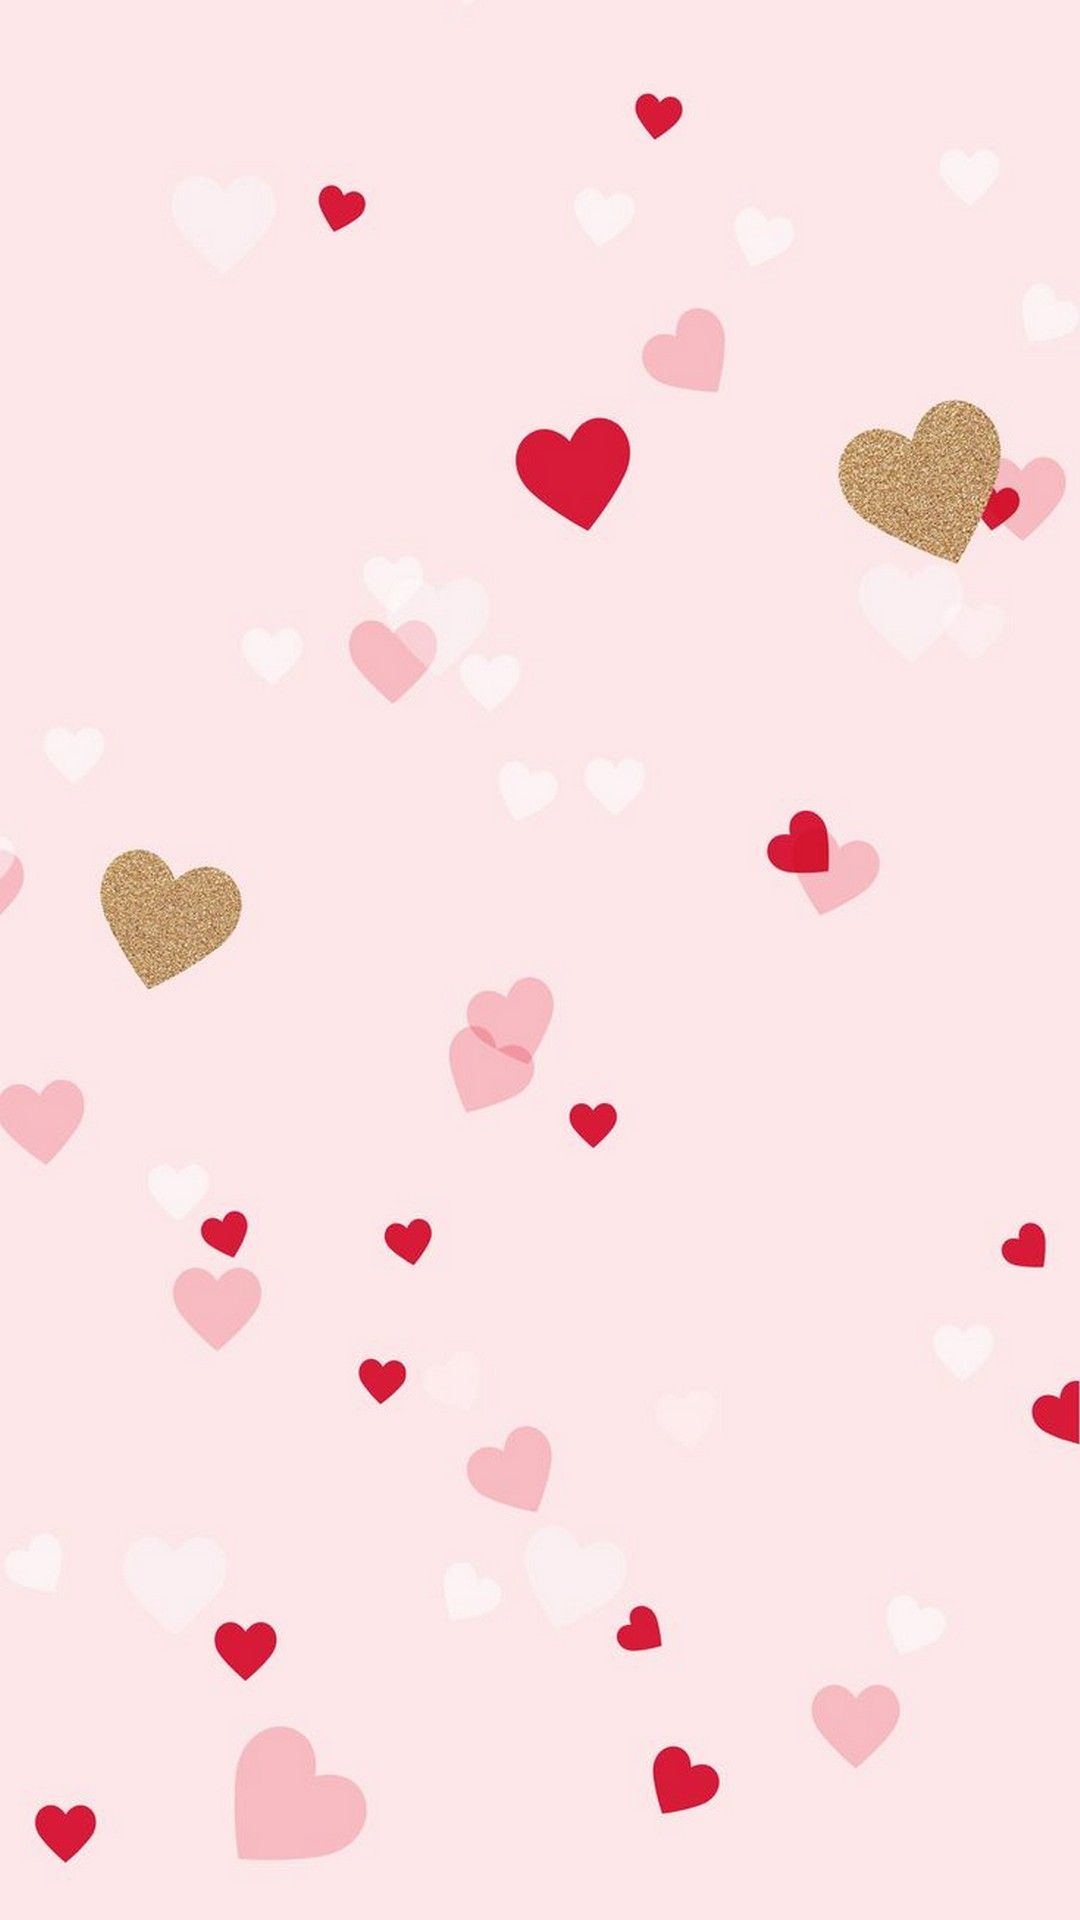 Valentines Day Wallpaper Pink Heart  The Dreamiest iPhone Wallpapers For Valentines  Day That Fit Any Aesthetic  POPSUGAR Tech Photo 20